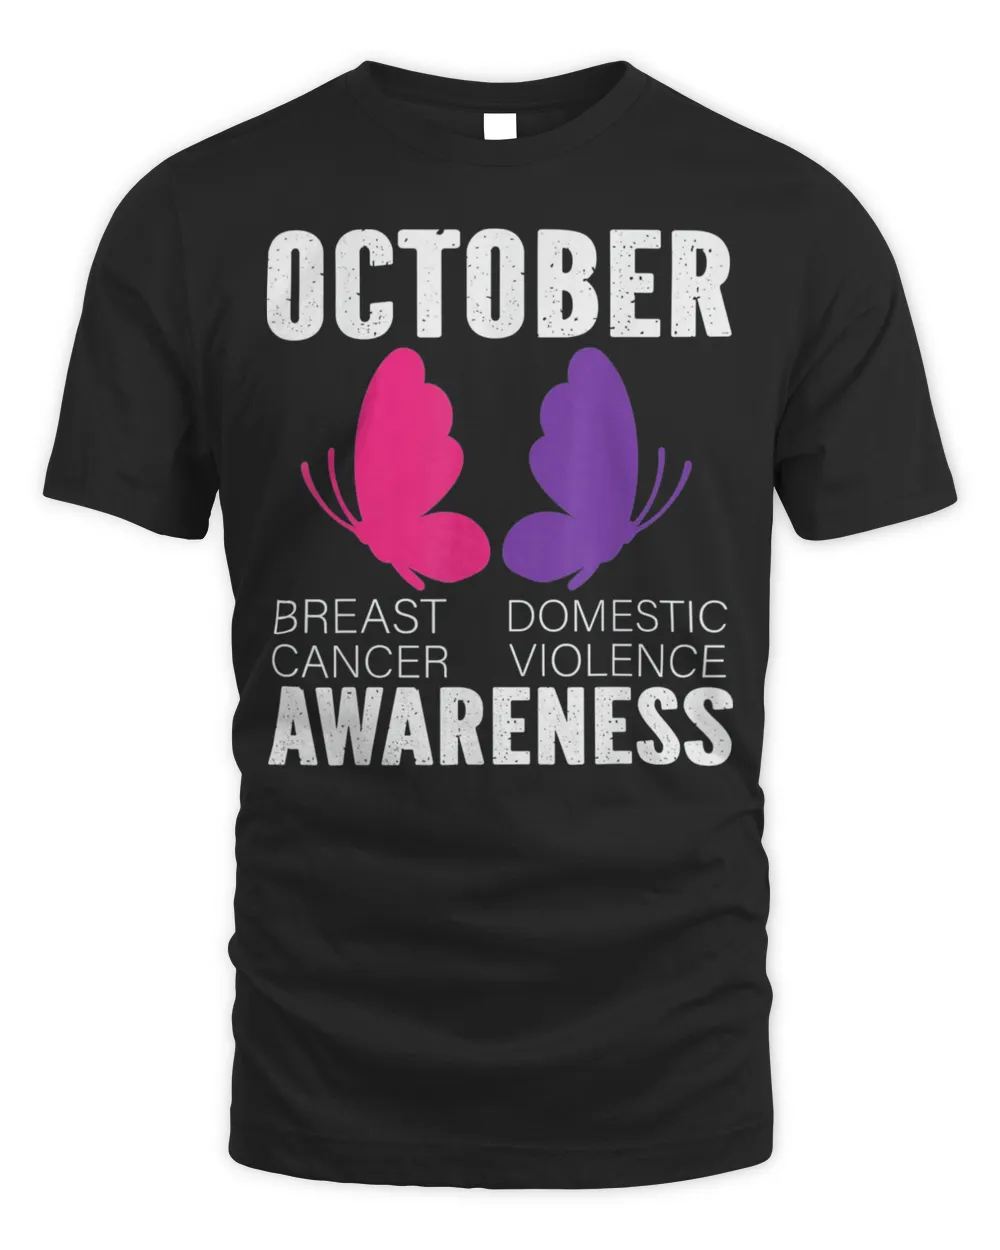 Breast Cancer And Domestic Violence Awareness Butterfly T-Shirt Unisex Standard T-Shirt black xl